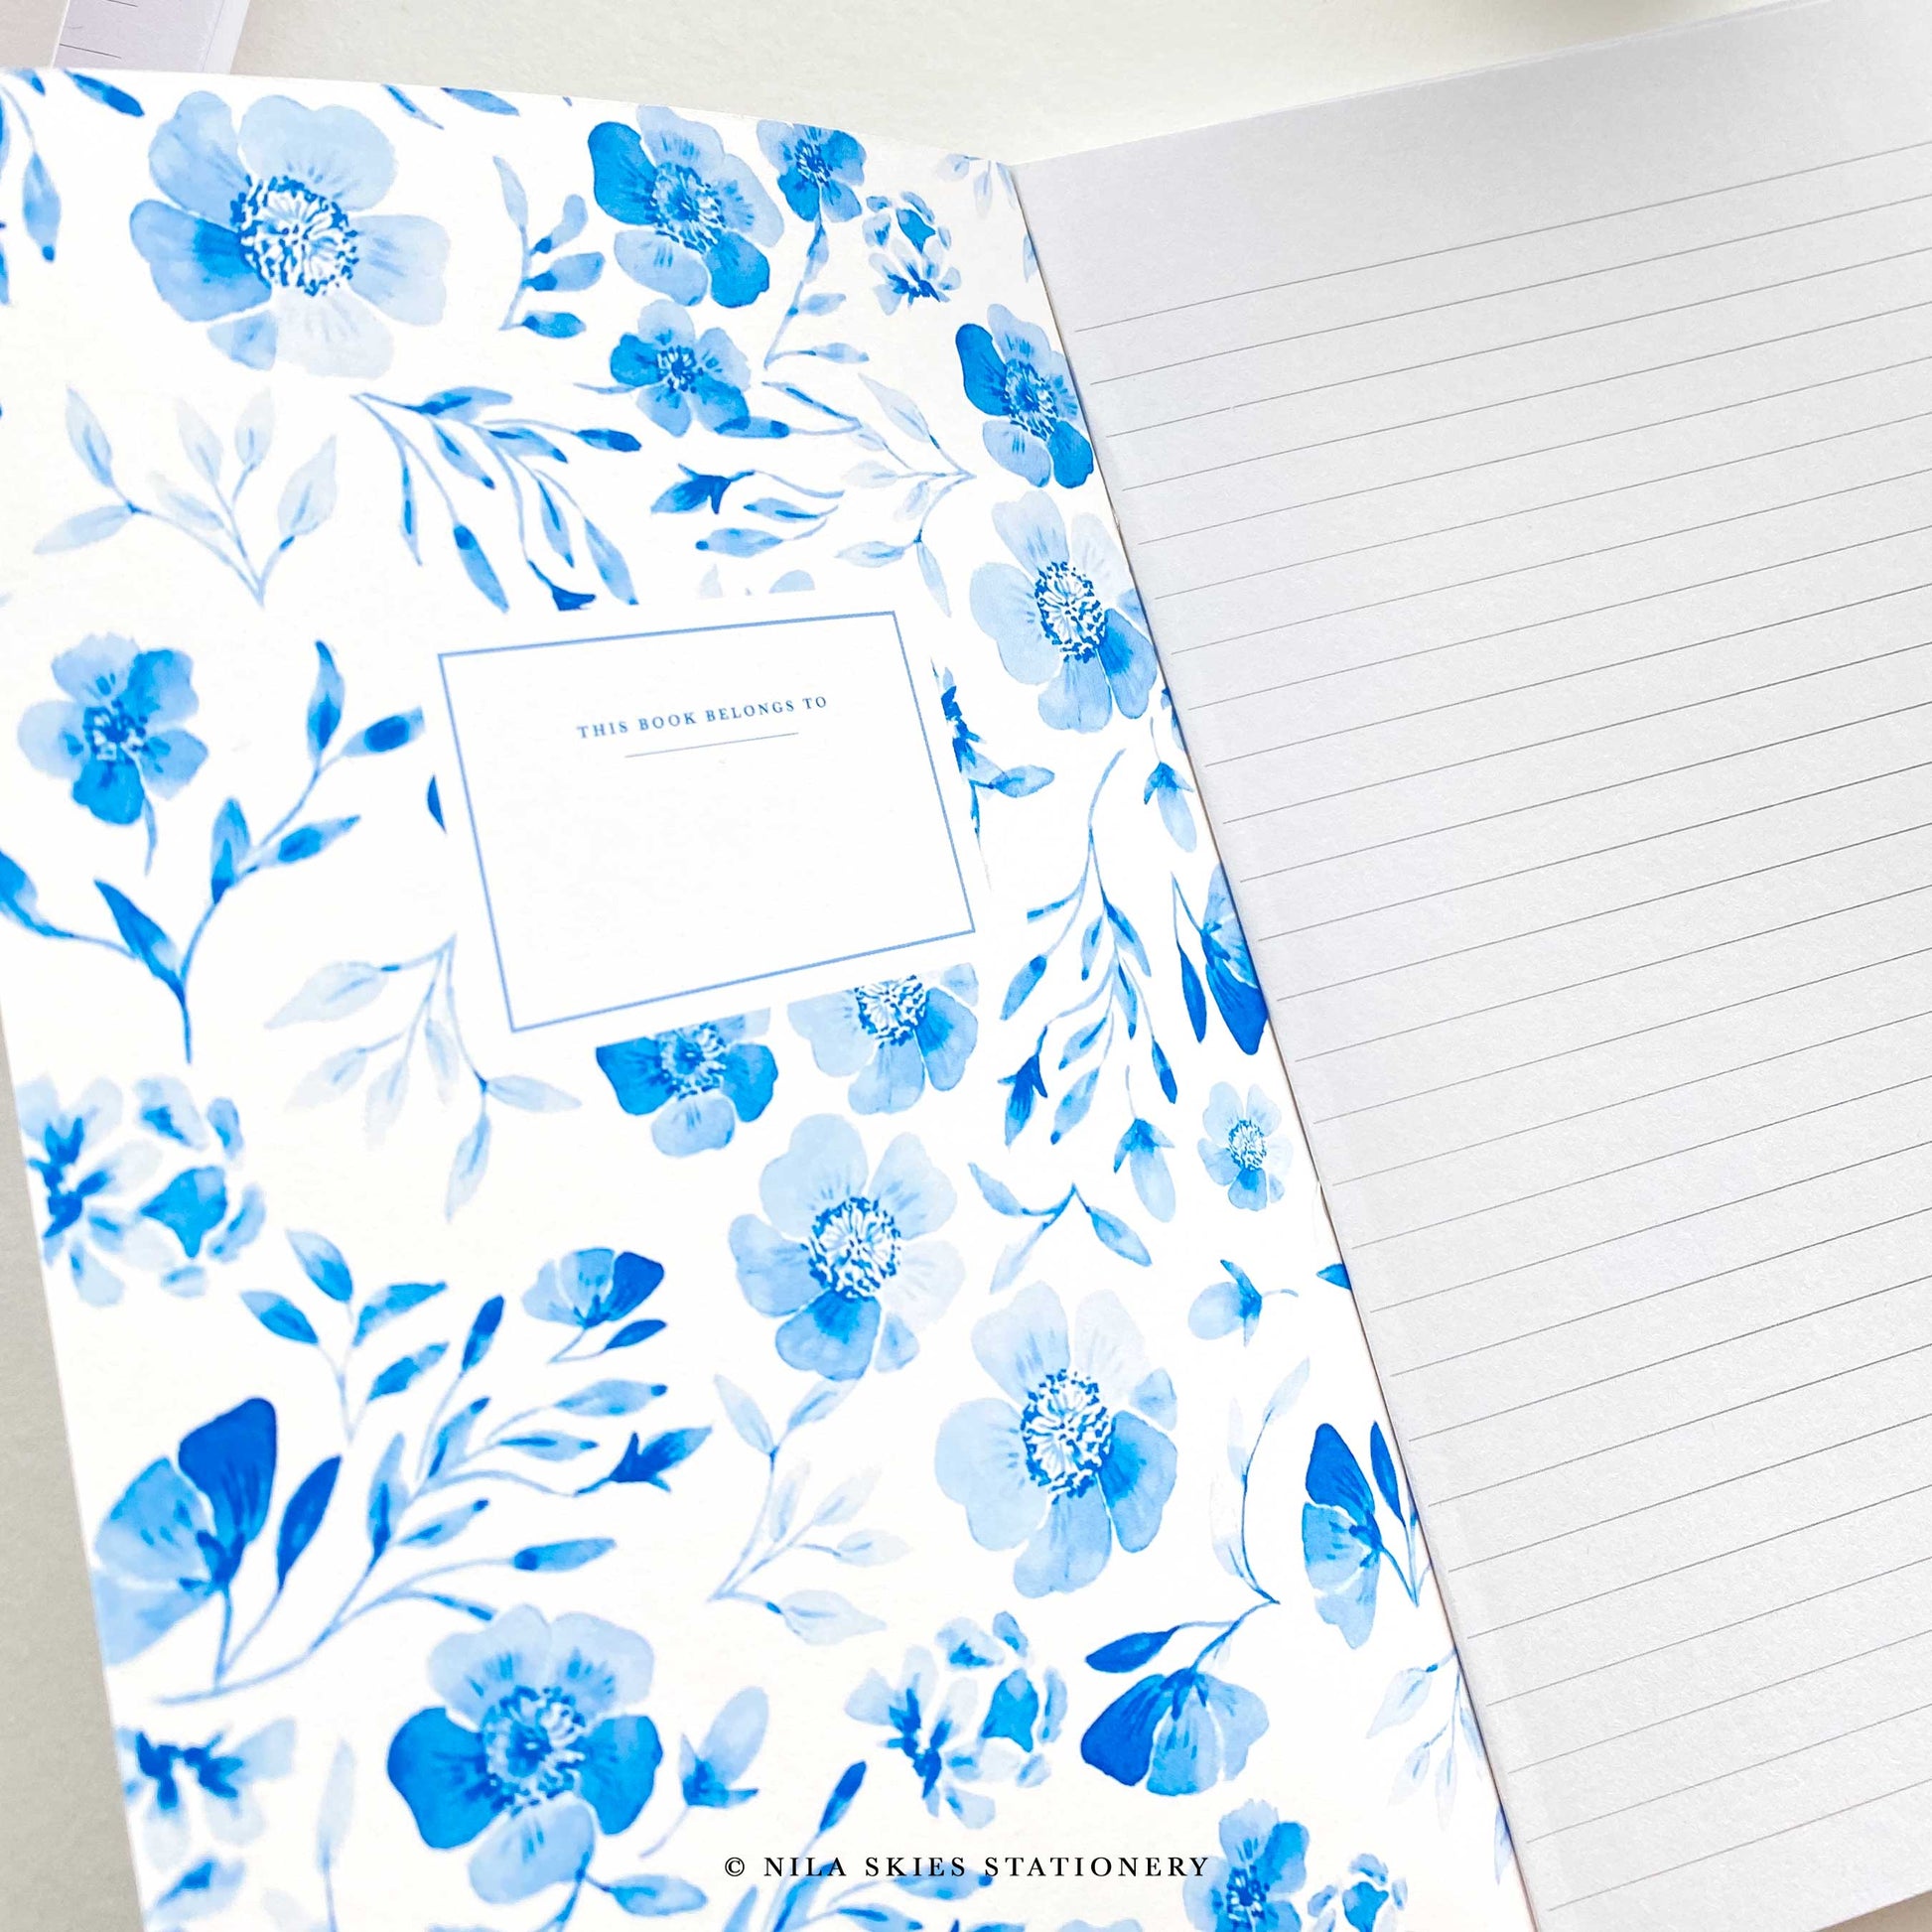 Blue Watercolor Paint Texture Spiral Notebook by 4khz 